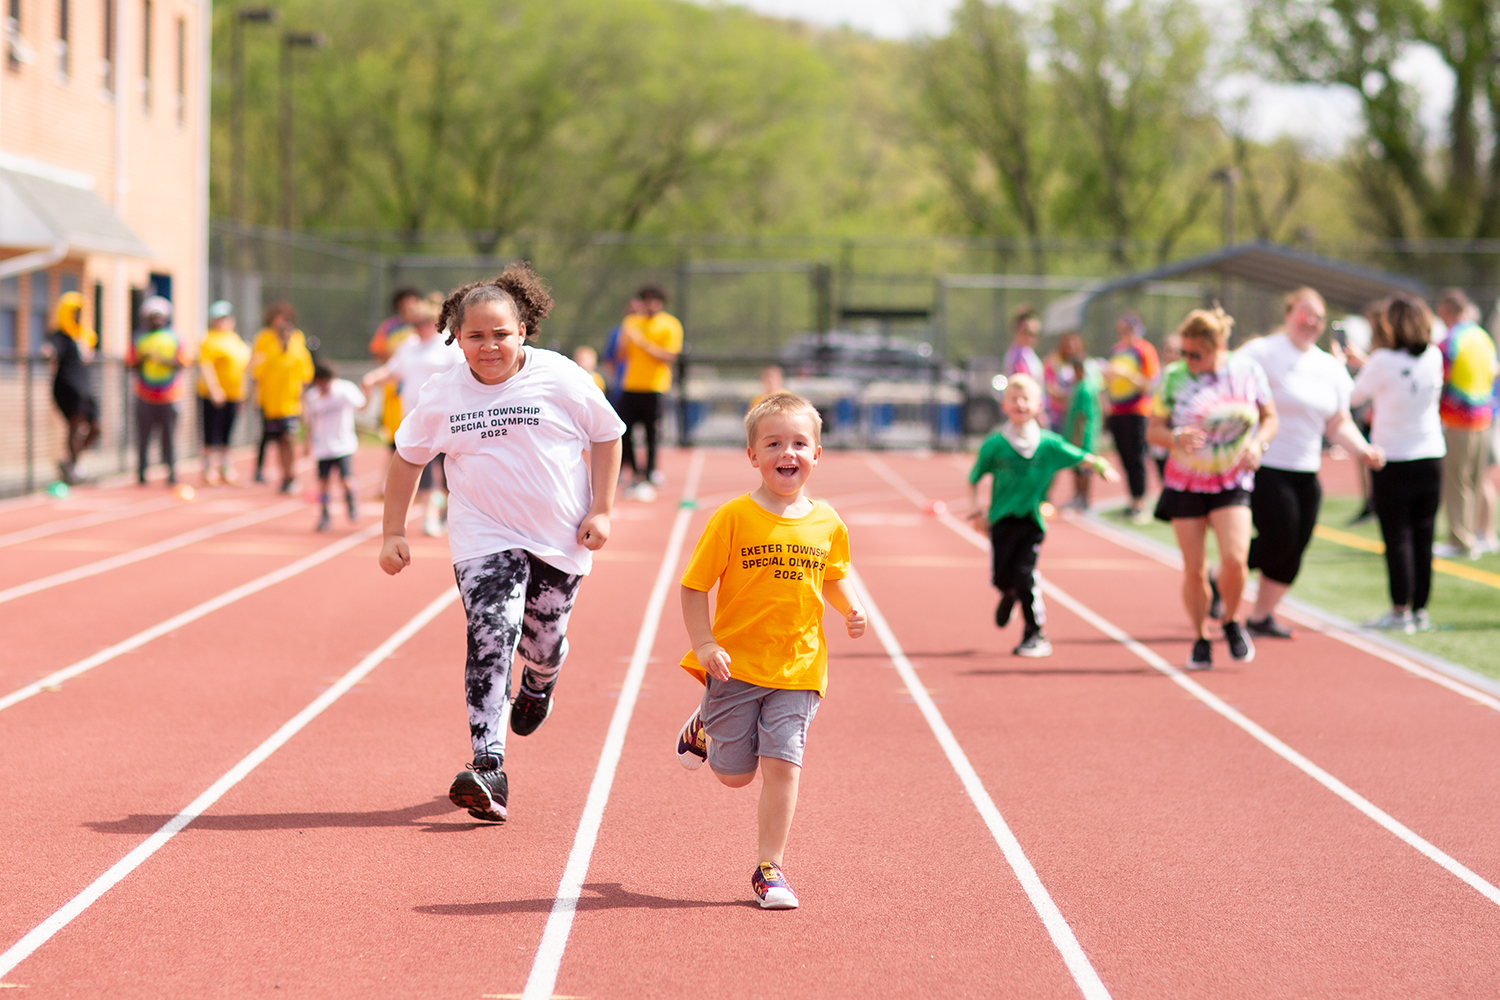 exeter's special education athletes participate in field day